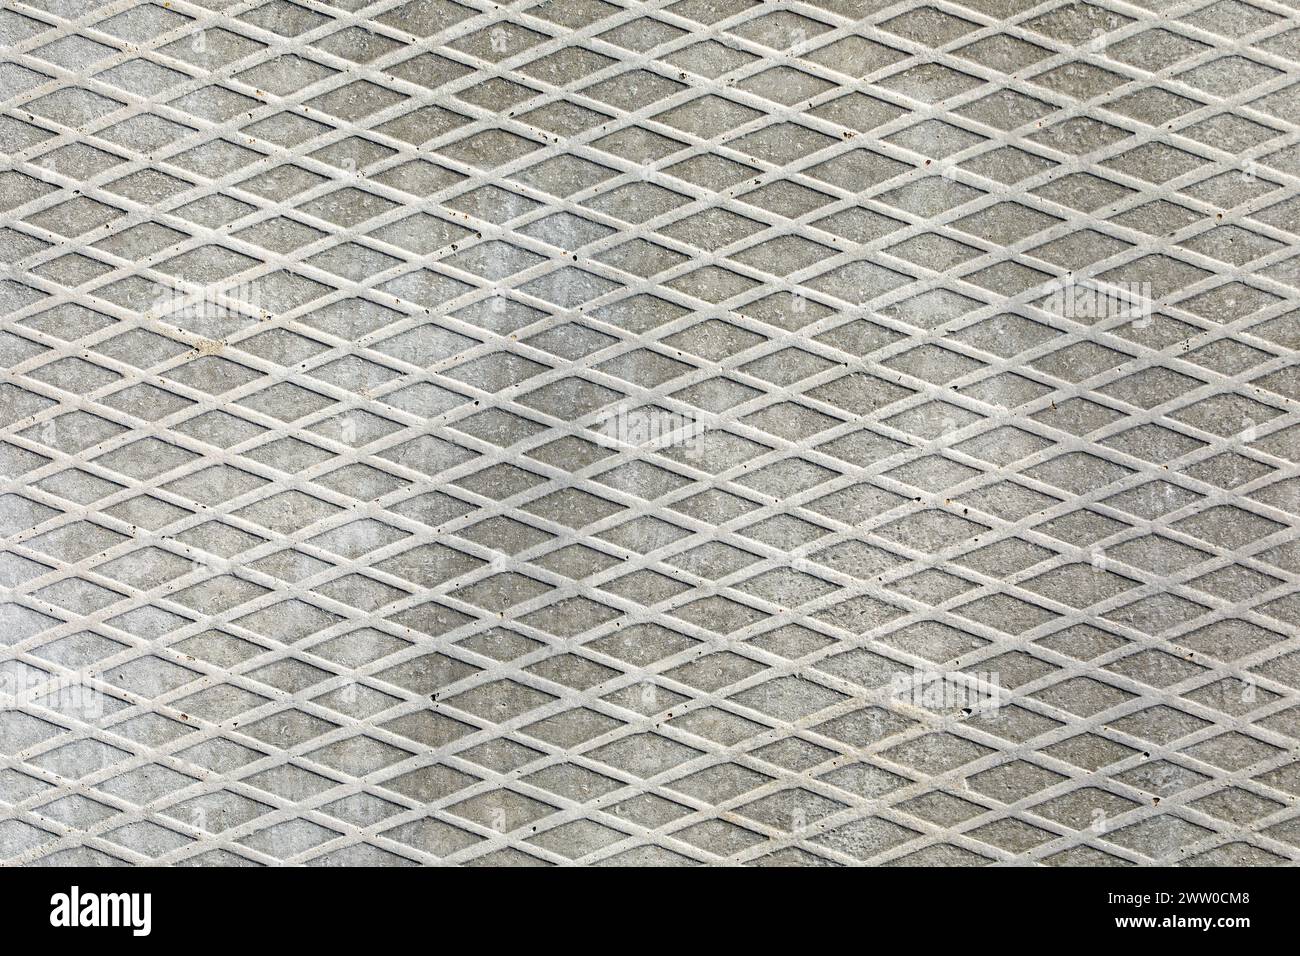 Background of the concrete pavement texture, diagonal and rhombus patterns. Grey colour concrete tile, in close up. Stock Photo